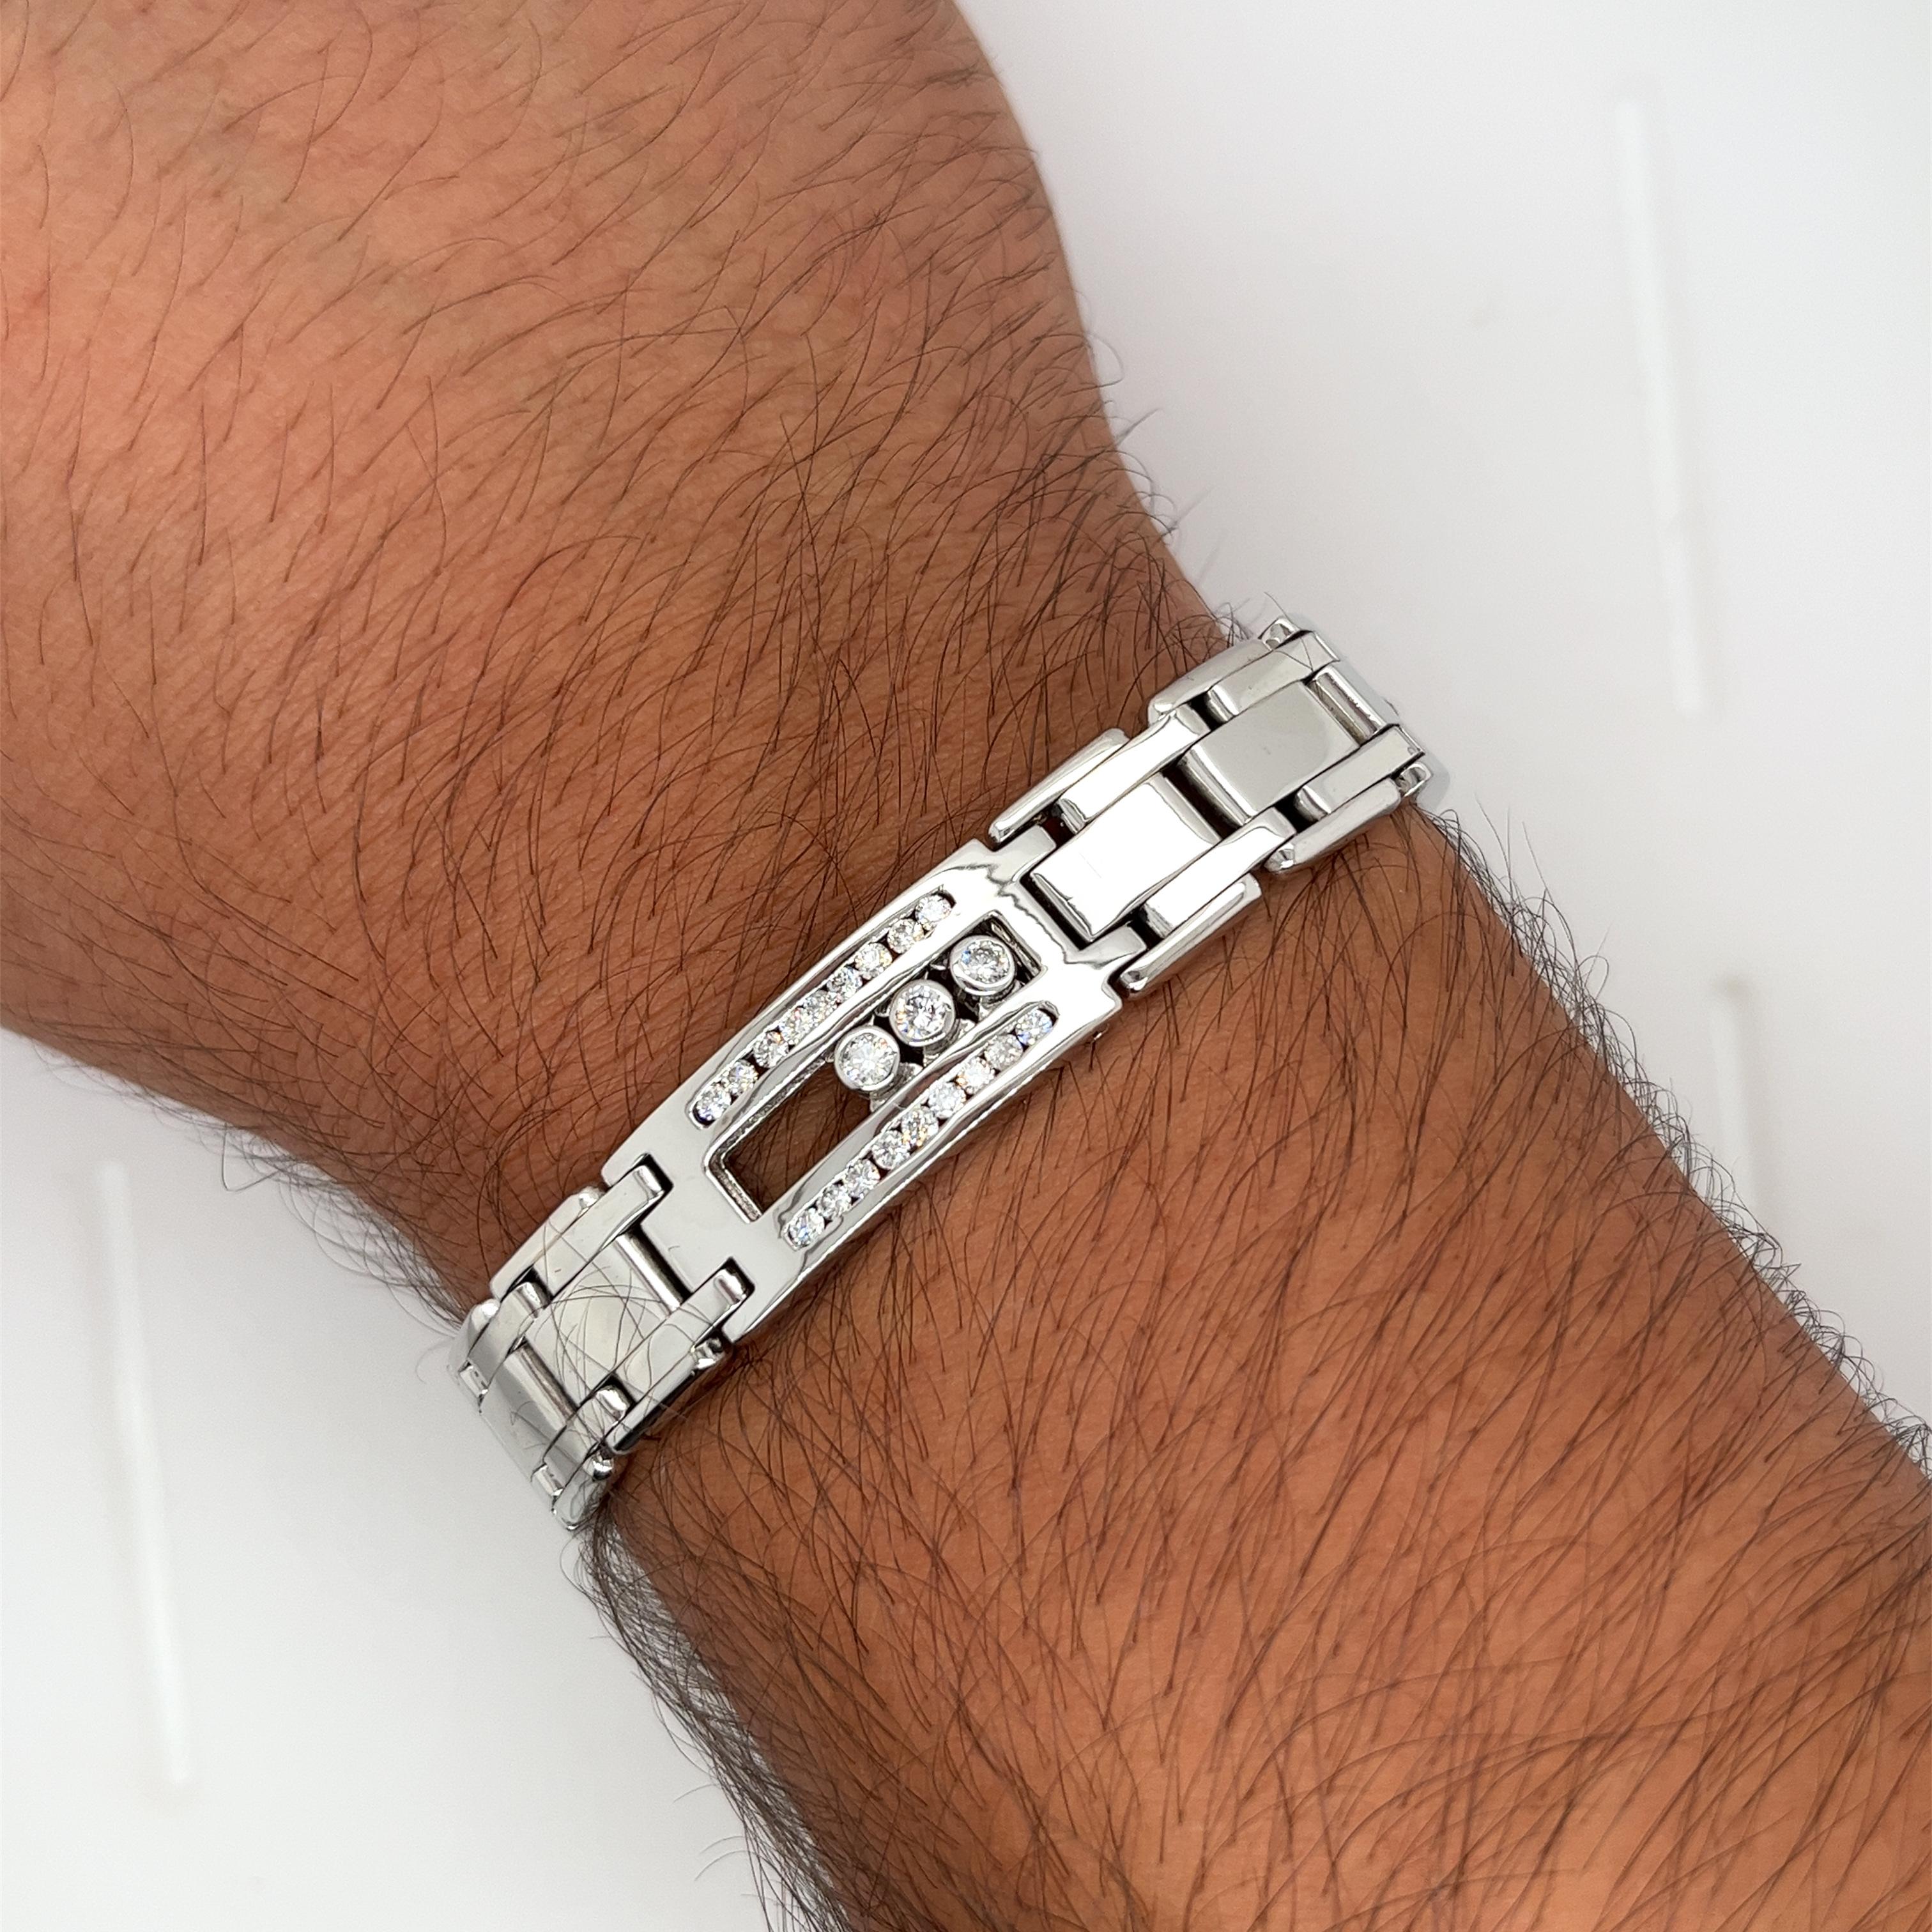 Get the bracelet that no one has. 

This unique bracelet features movable diamonds that glide along the channel set interior. An extraordinary make with eye-clean round cut diamonds. Set in 14 karat solid white gold and box/clip closure. 

12 bezel